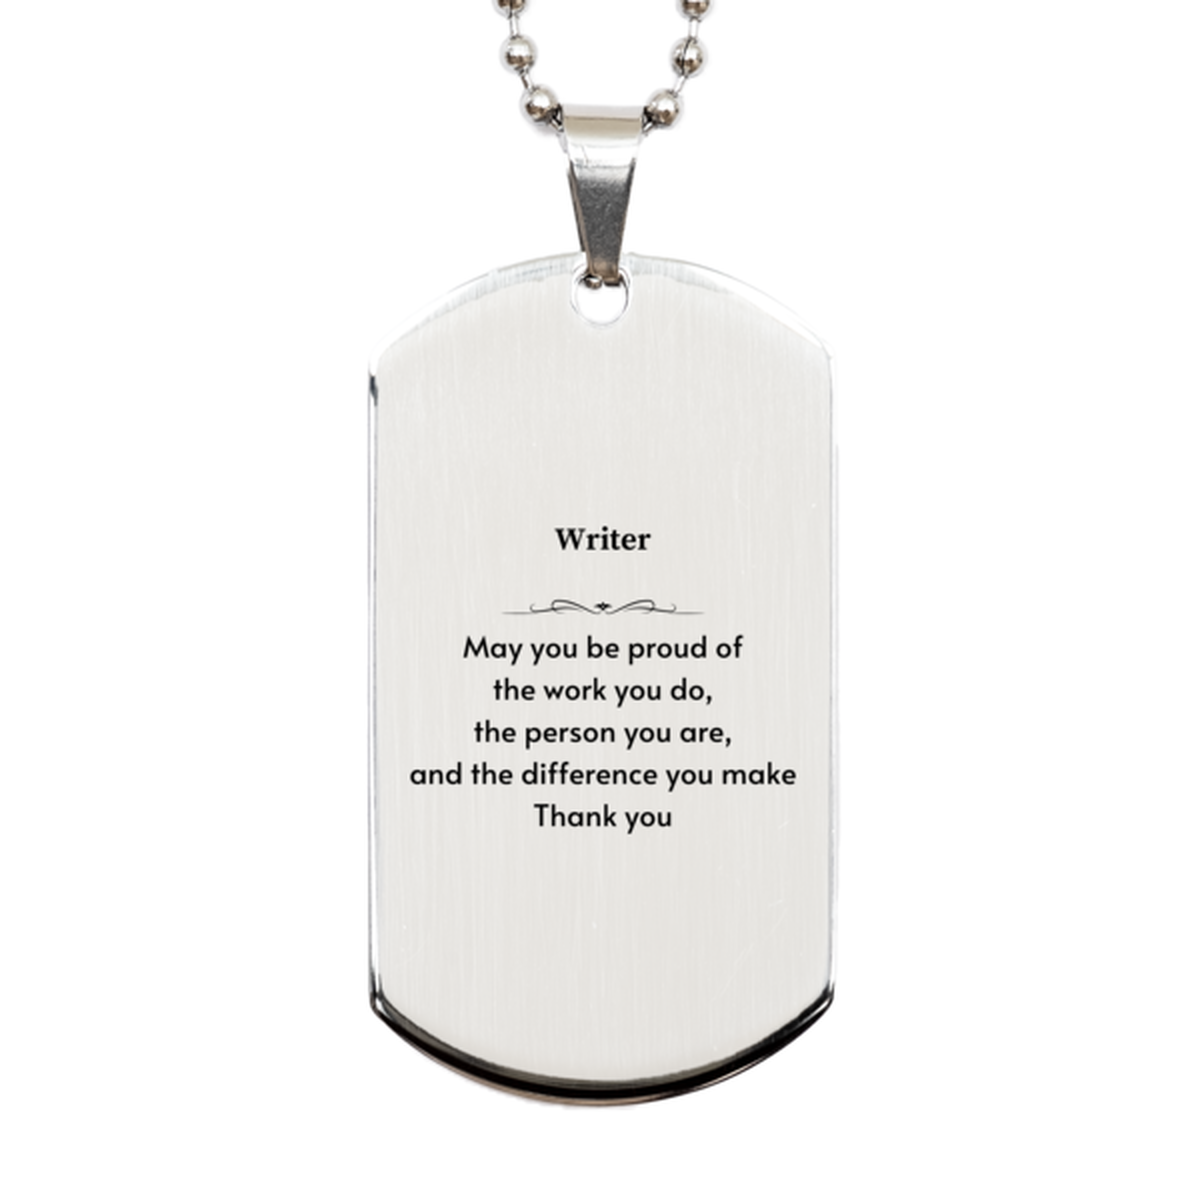 Heartwarming Silver Dog Tag Retirement Coworkers Gifts for Writer, Writer May You be proud of the work you do, the person you are Gifts for Boss Men Women Friends